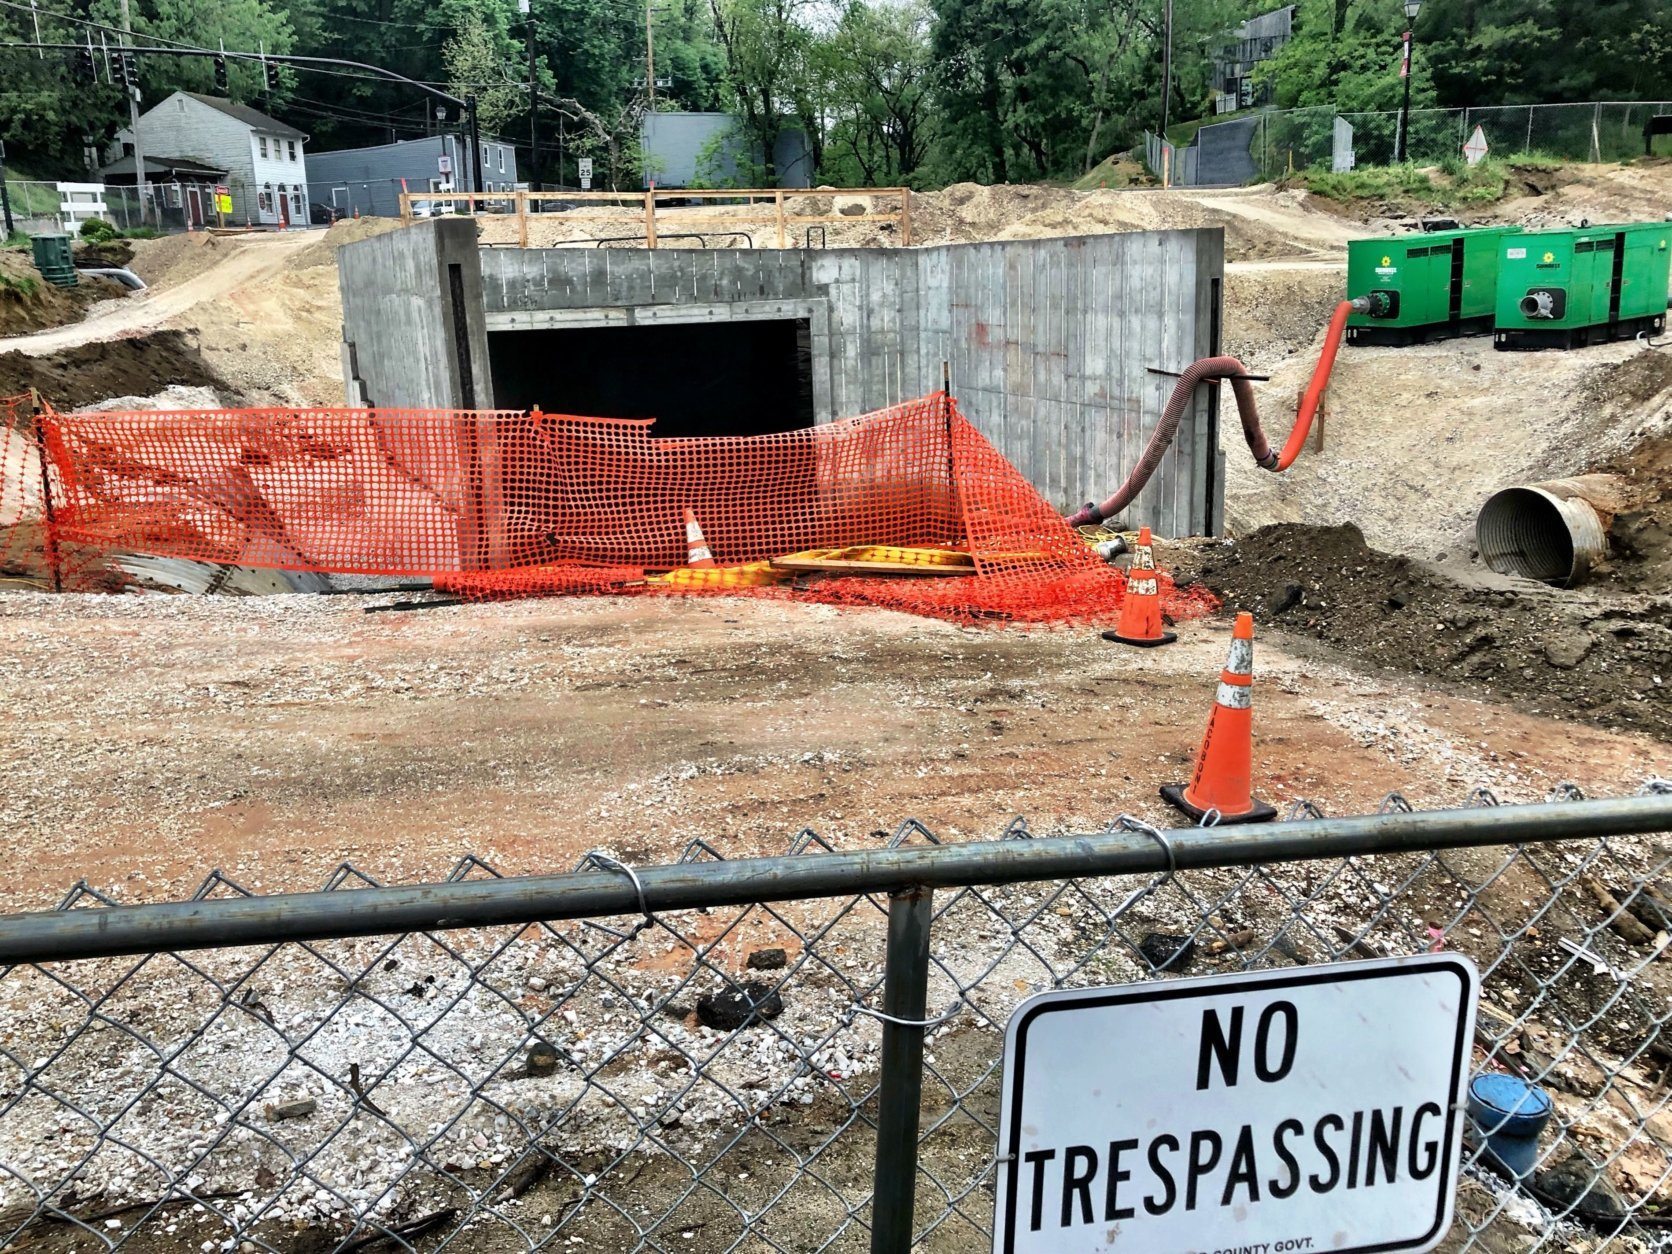 Howard County has built a concrete culvert that's 24 feet wide by 13 feet high  and repaved the portion of Ellicott Mills Drive that was washed away in May 2018. (WTOP/Neal Augenstein)